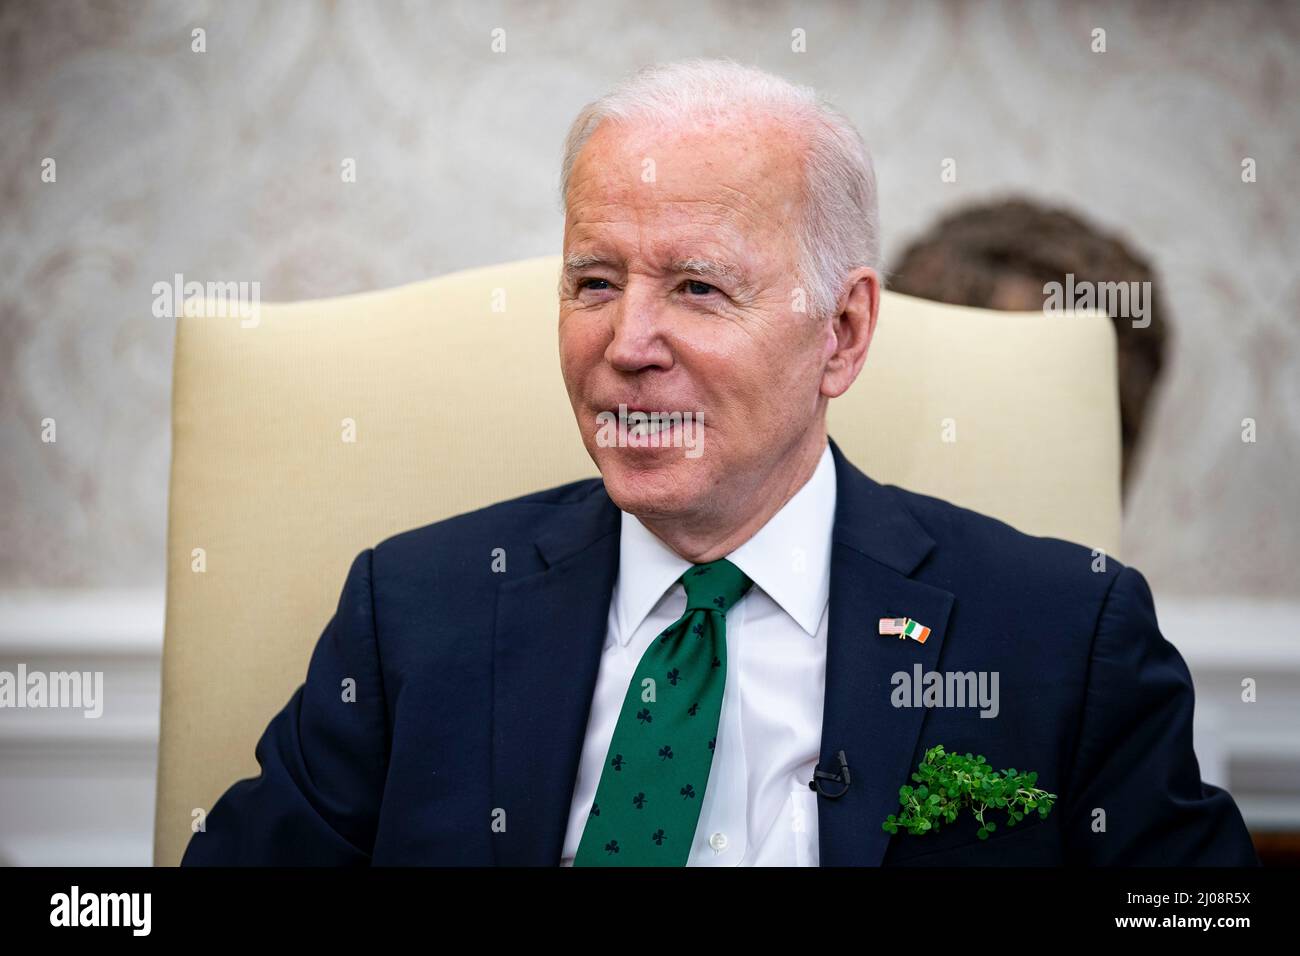 Washington, USA. 17th Mar, 2022. U.S. President Joe Biden speaks while meeting virtually with Micheal Martin, Ireland's prime minister, not pictured, in the Oval Office of the White House in Washington, DC, U.S., on Thursday, March 17, 2022. Martin tested positive for Covid-19 while in Washington for St. Patrick's Day celebrations. (Photographer: Al Drago/Pool/Sipa USA) Credit: Sipa USA/Alamy Live News Stock Photo